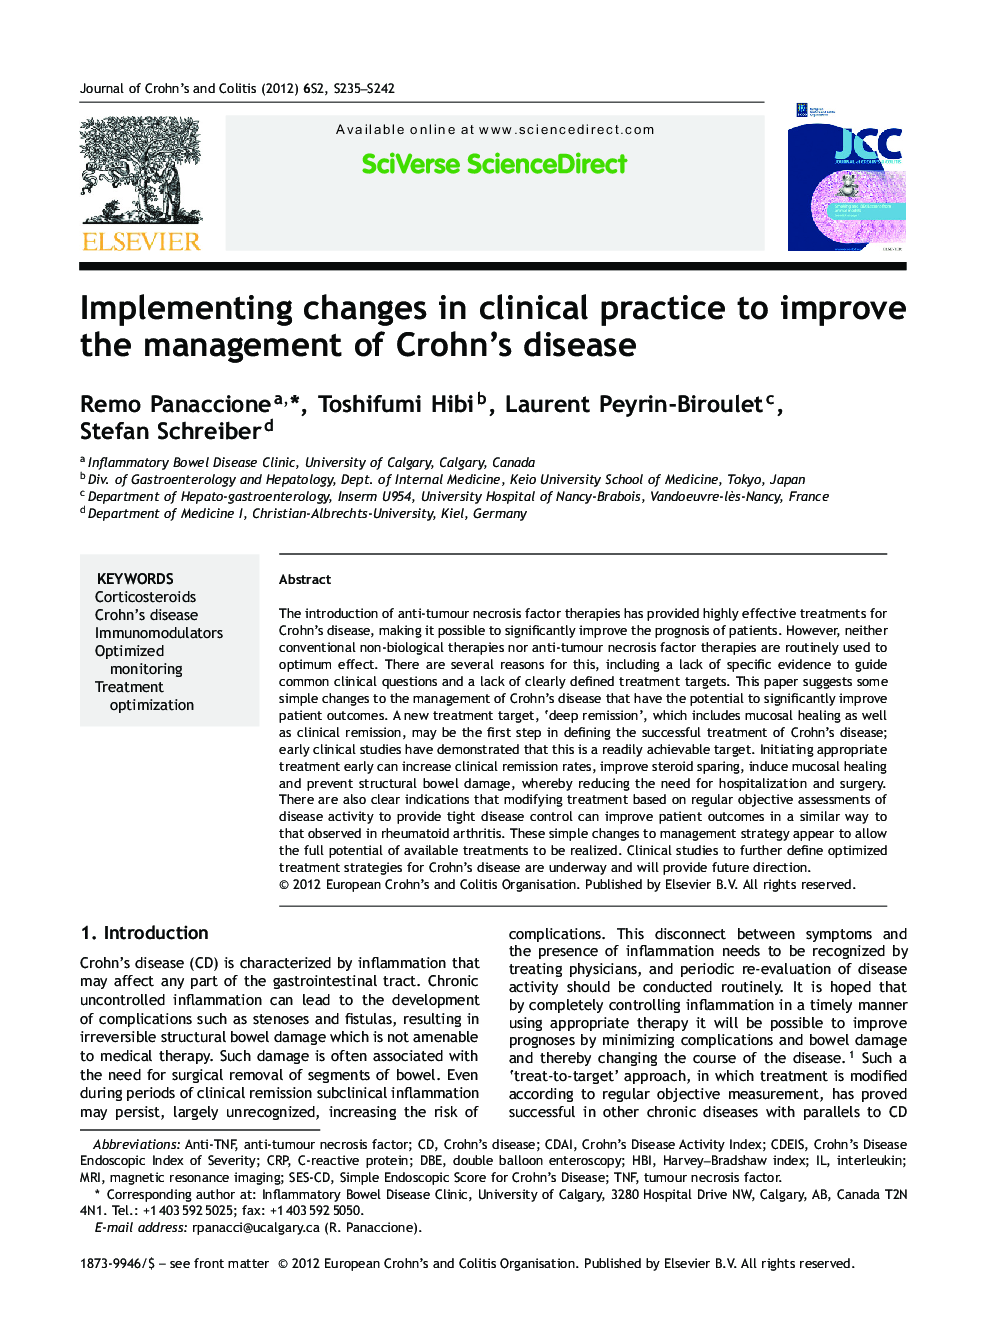 Implementing changes in clinical practice to improve the management of Crohn's disease